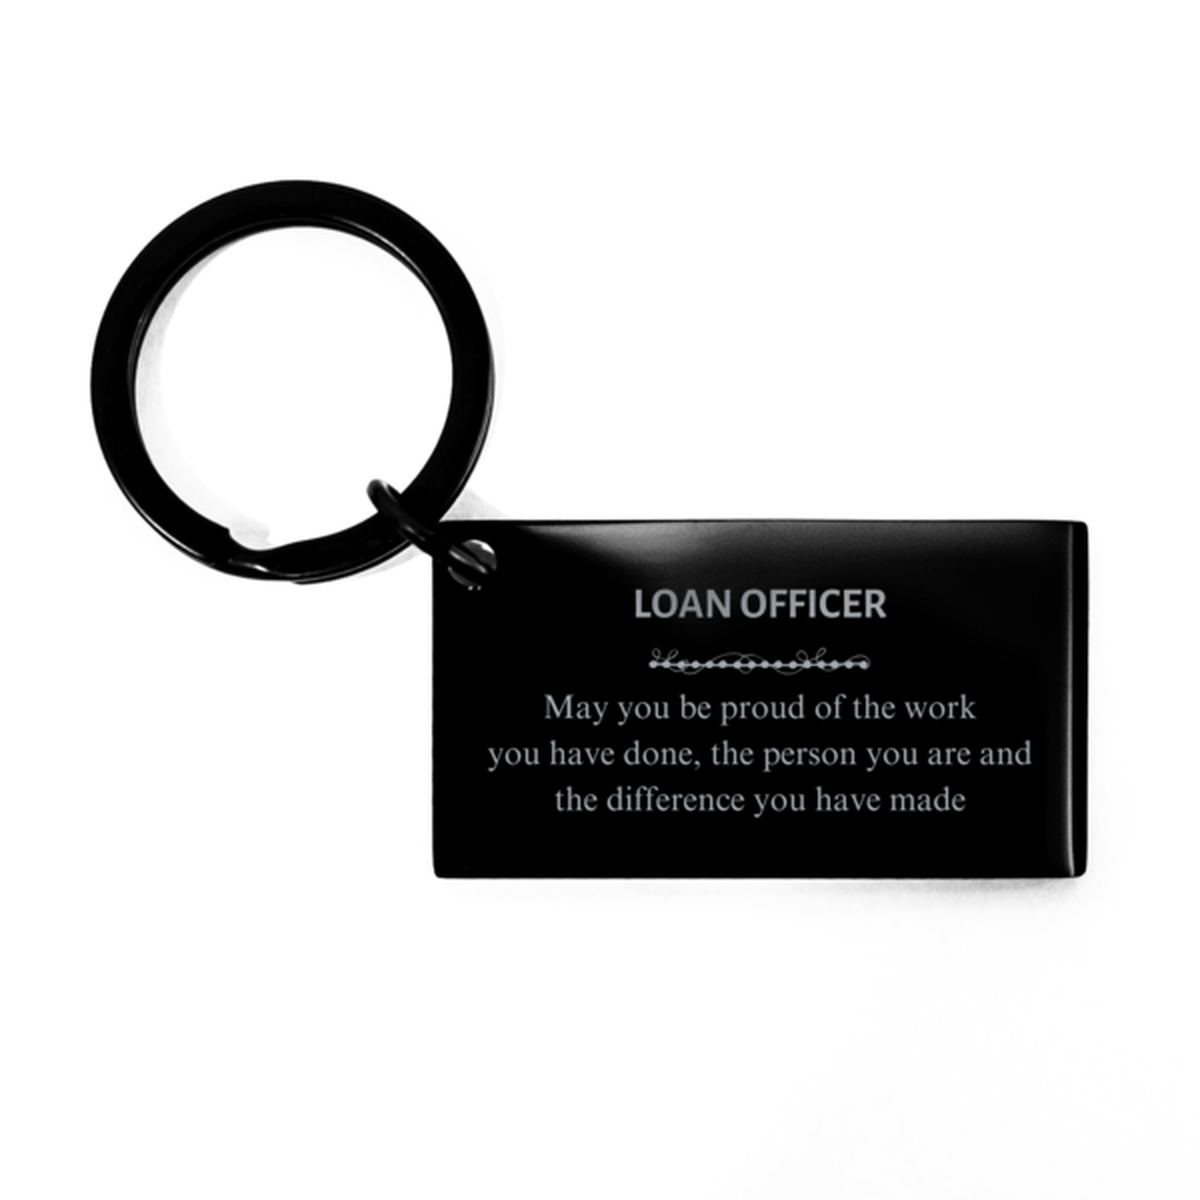 Nuclear Technologist May you be proud of the work you have done, Retirement Loan Officer Keychain for Colleague Appreciation Gifts Amazing for Loan Officer